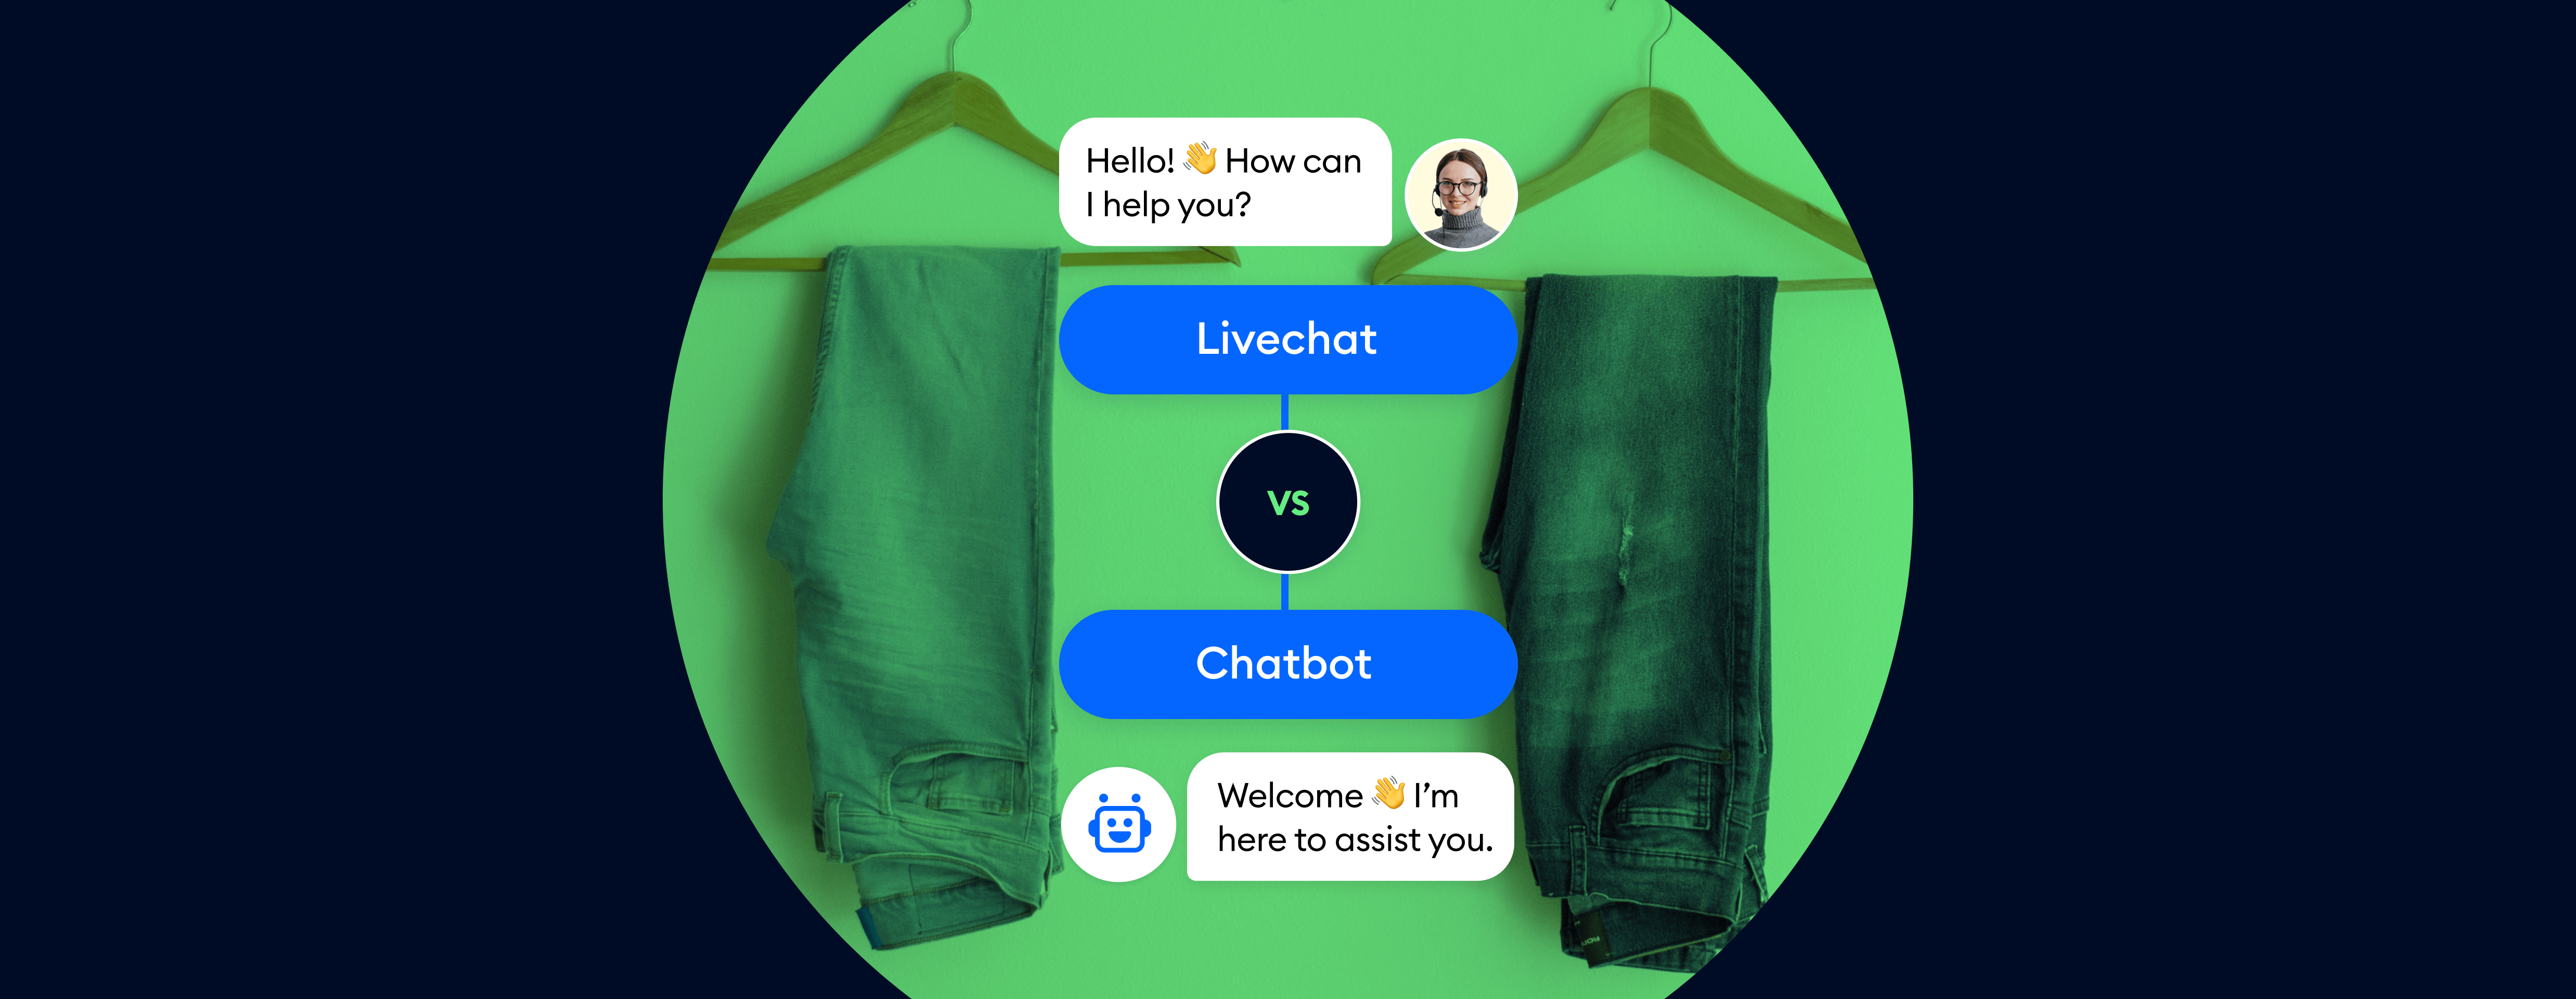 Chatbot vs livechat cover image